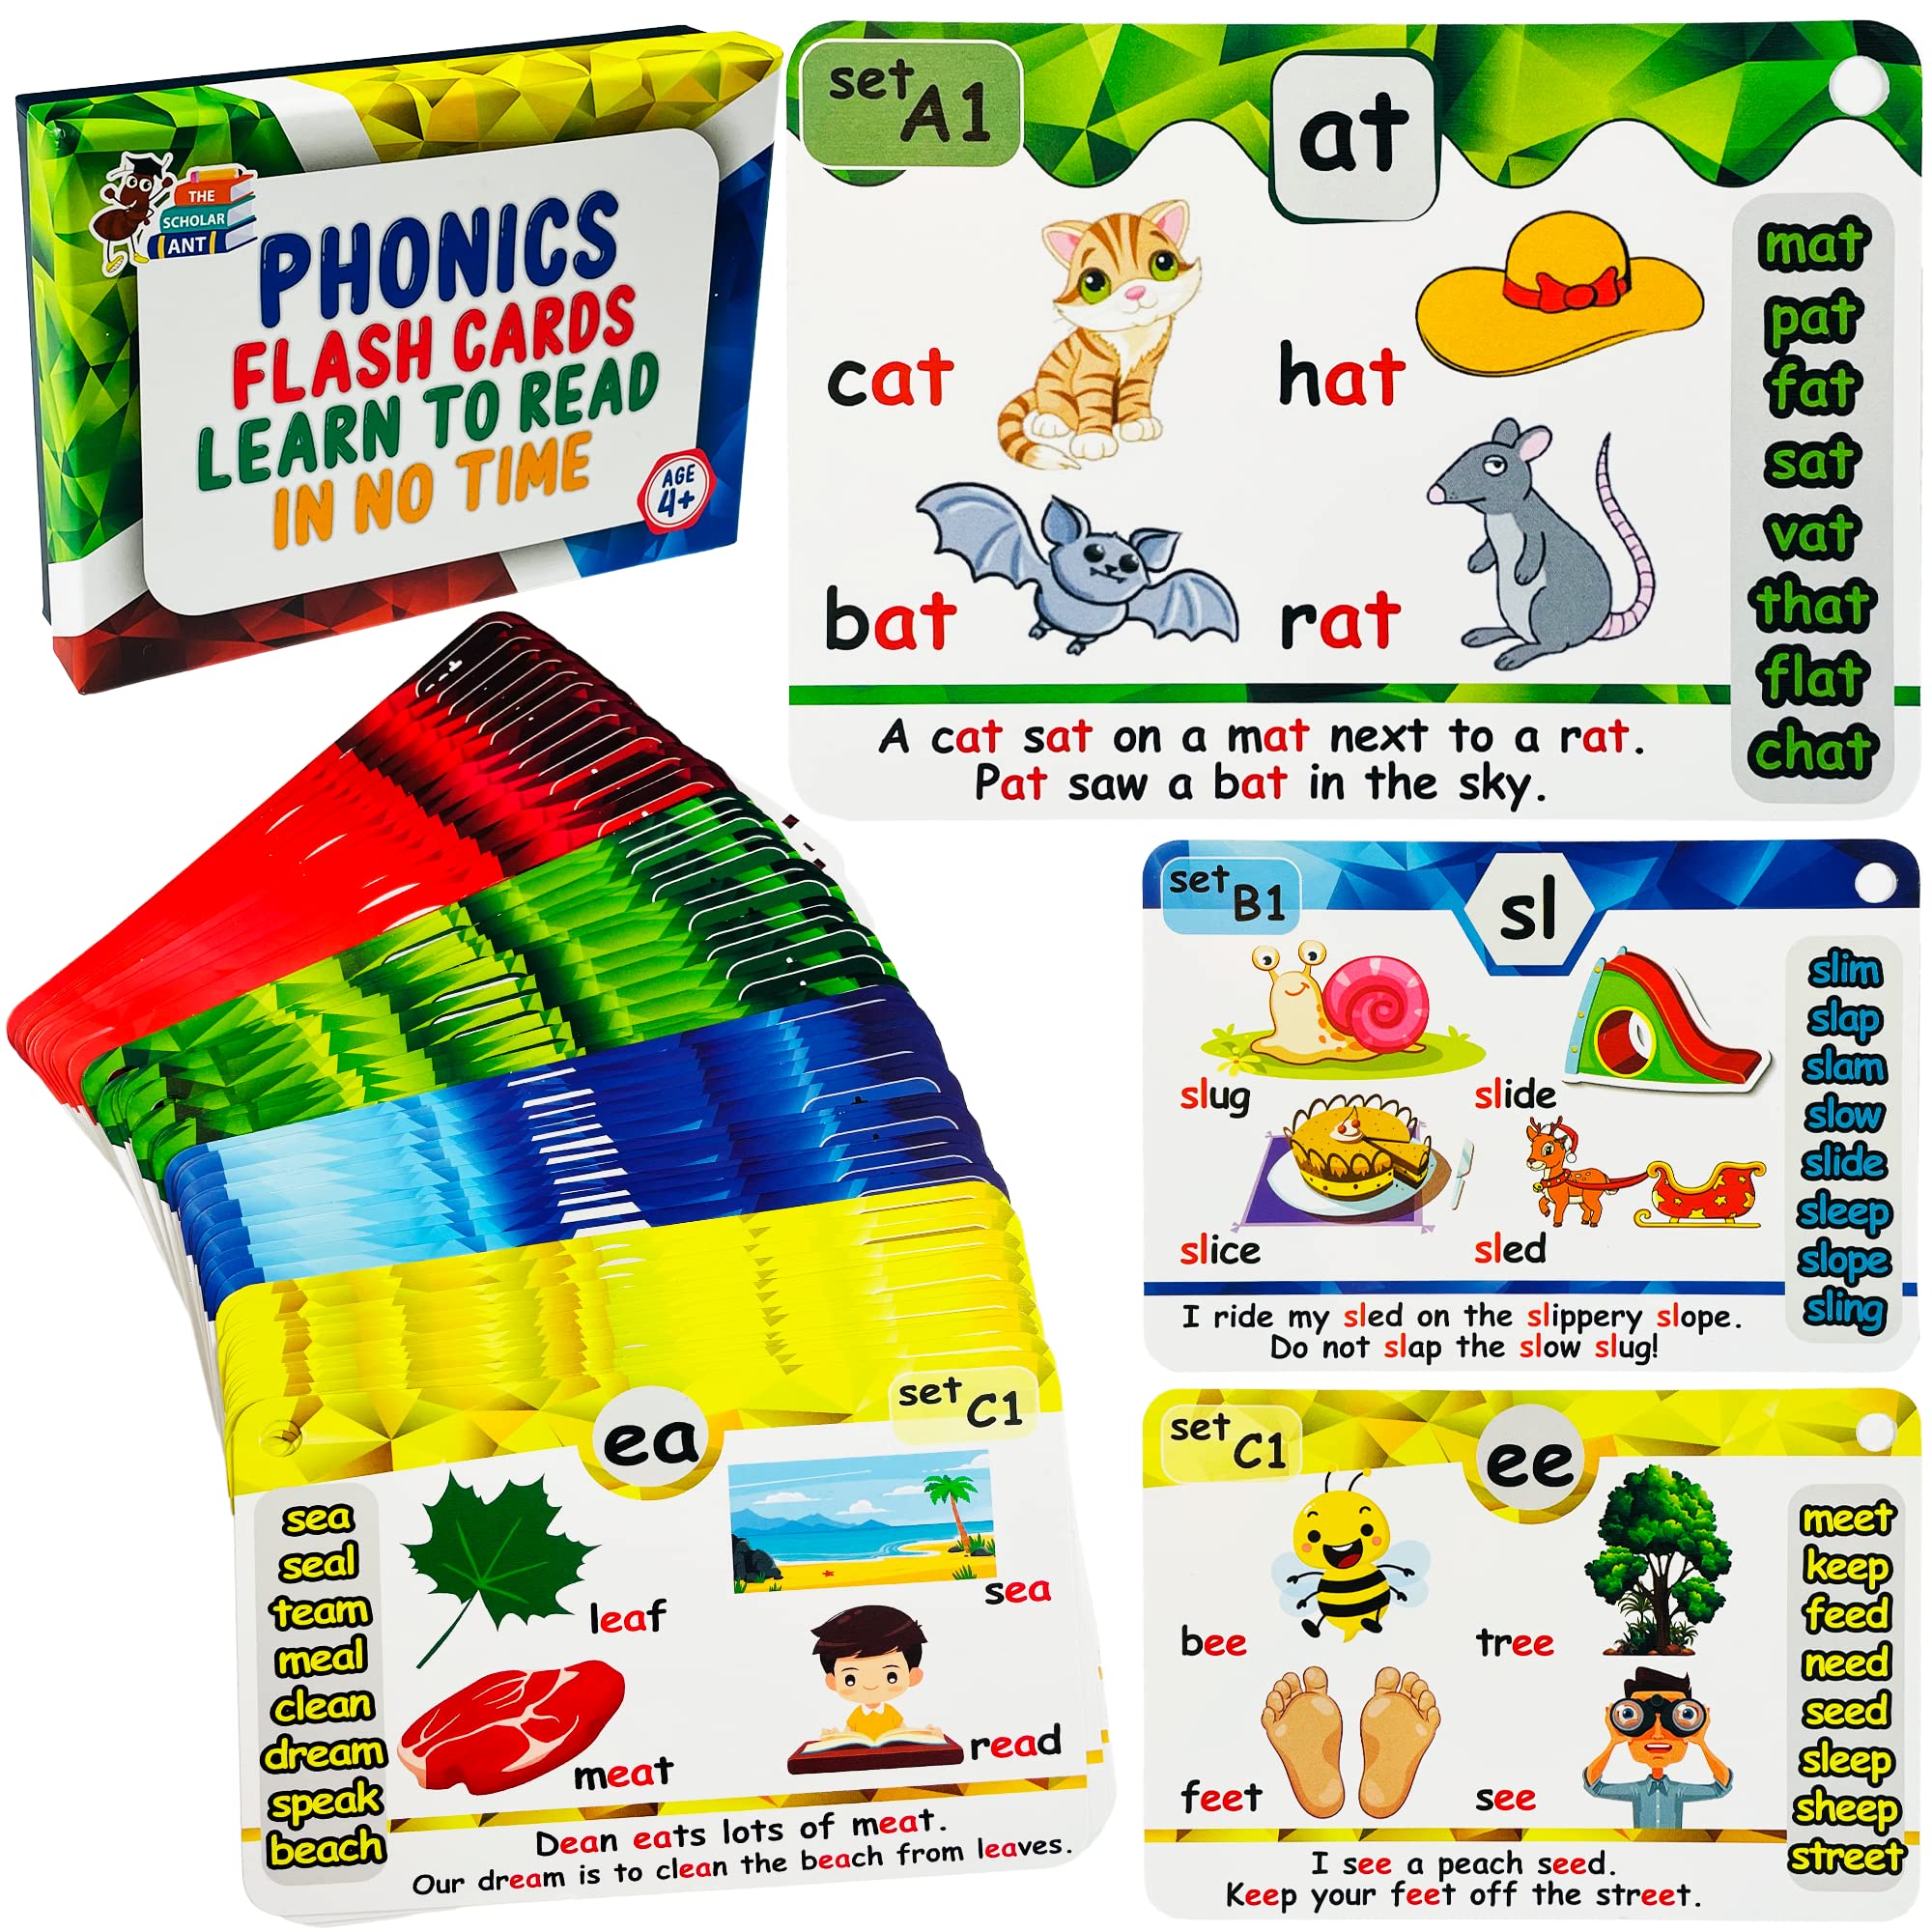 The Scholar Ant Phonics Flash cards - Learn to Read in 20 Phonic Stages - Digraphs cVc Blends Long Vowel Sounds - Phonics games for Kids Ages 4-